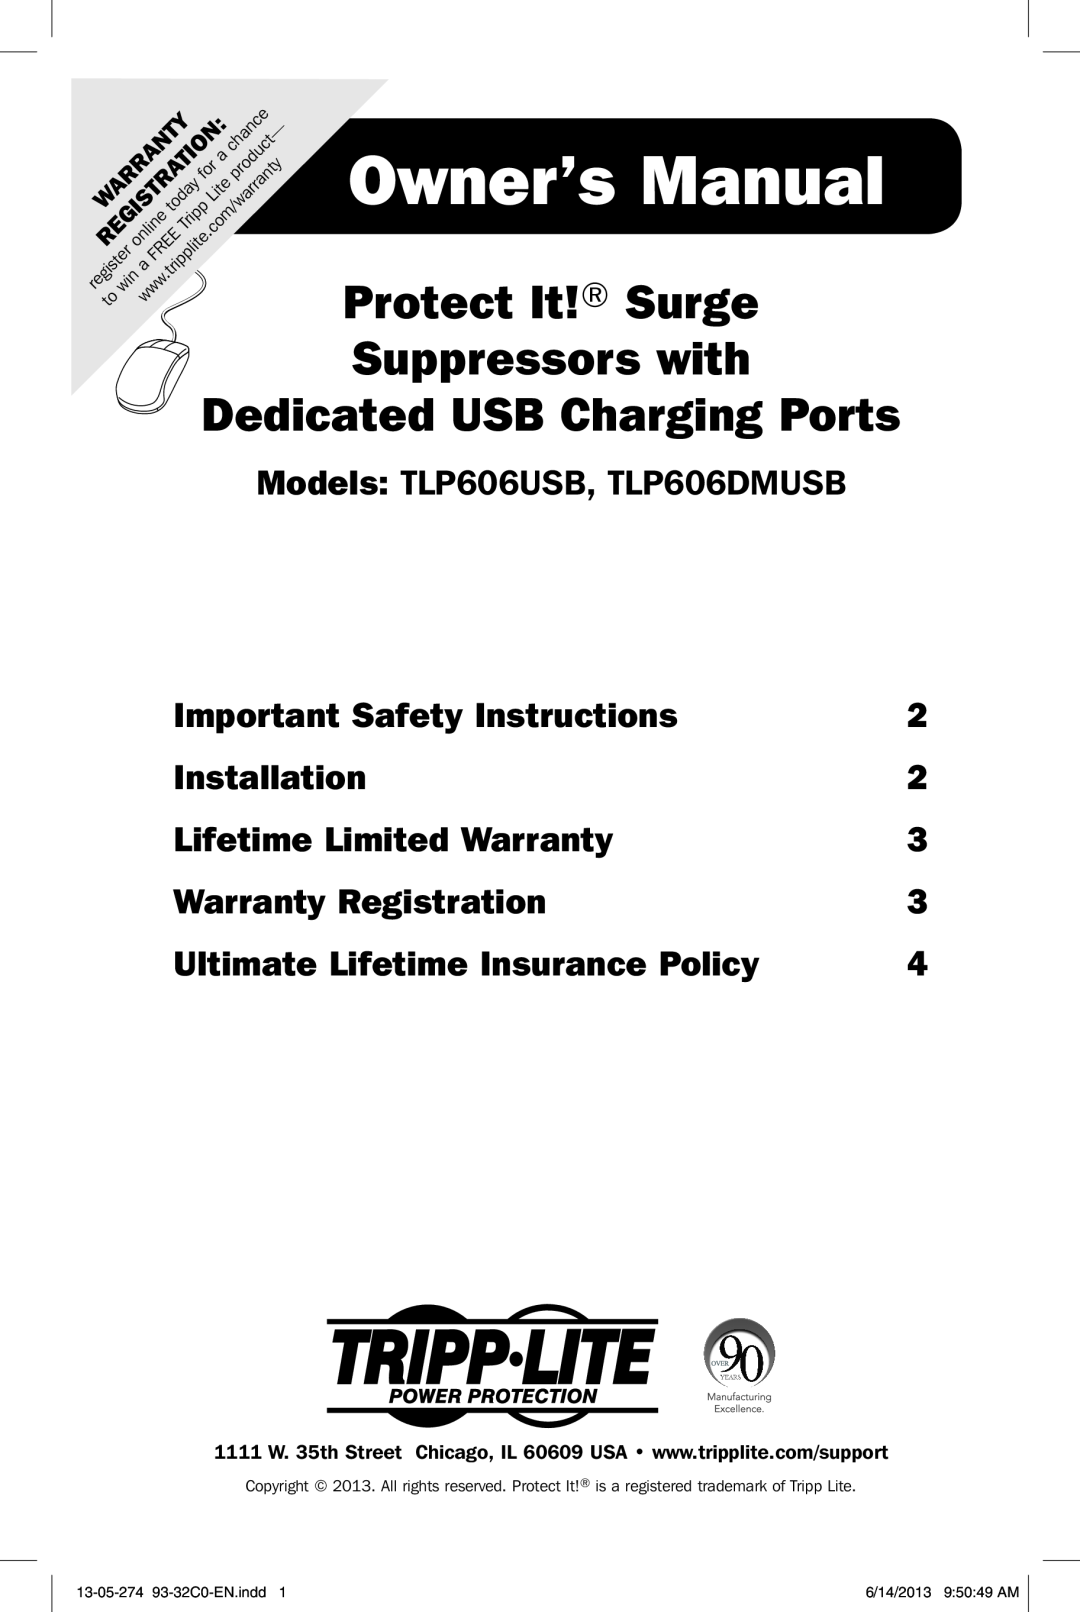 Tripp Lite owner manual Owner’s Manual, Protect It! Surge, Models TLP606USB, TLP606DMUSB, Important Safety Instructions 